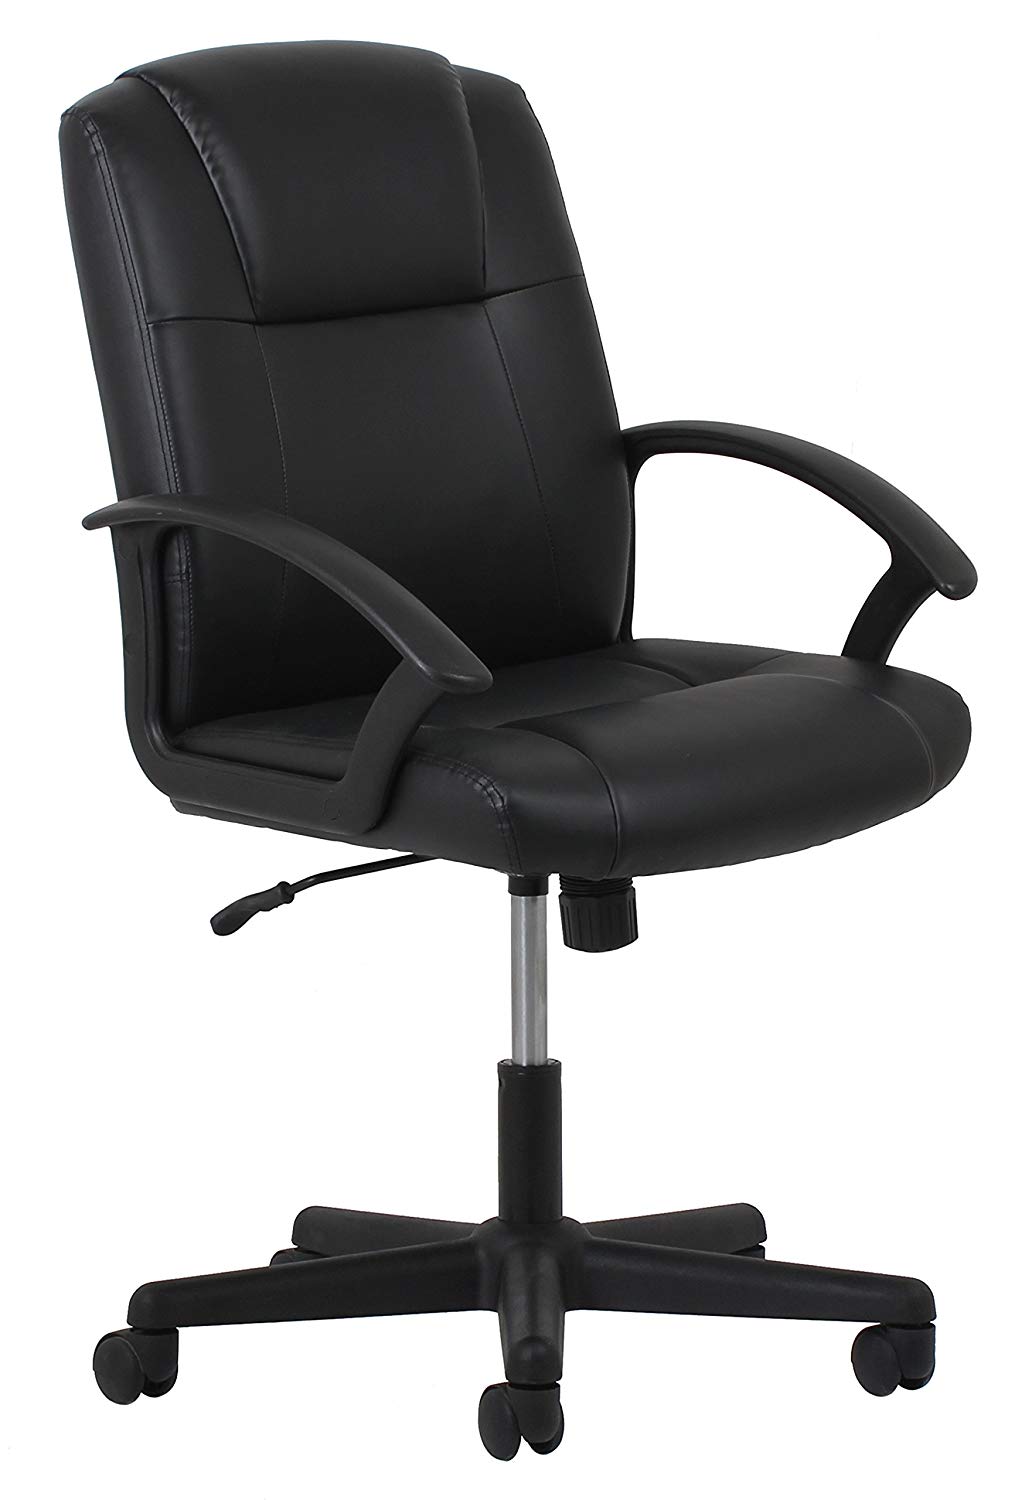 Best office chairs under $100 In 2019[Buyer’s Guide] - The Home Reviews